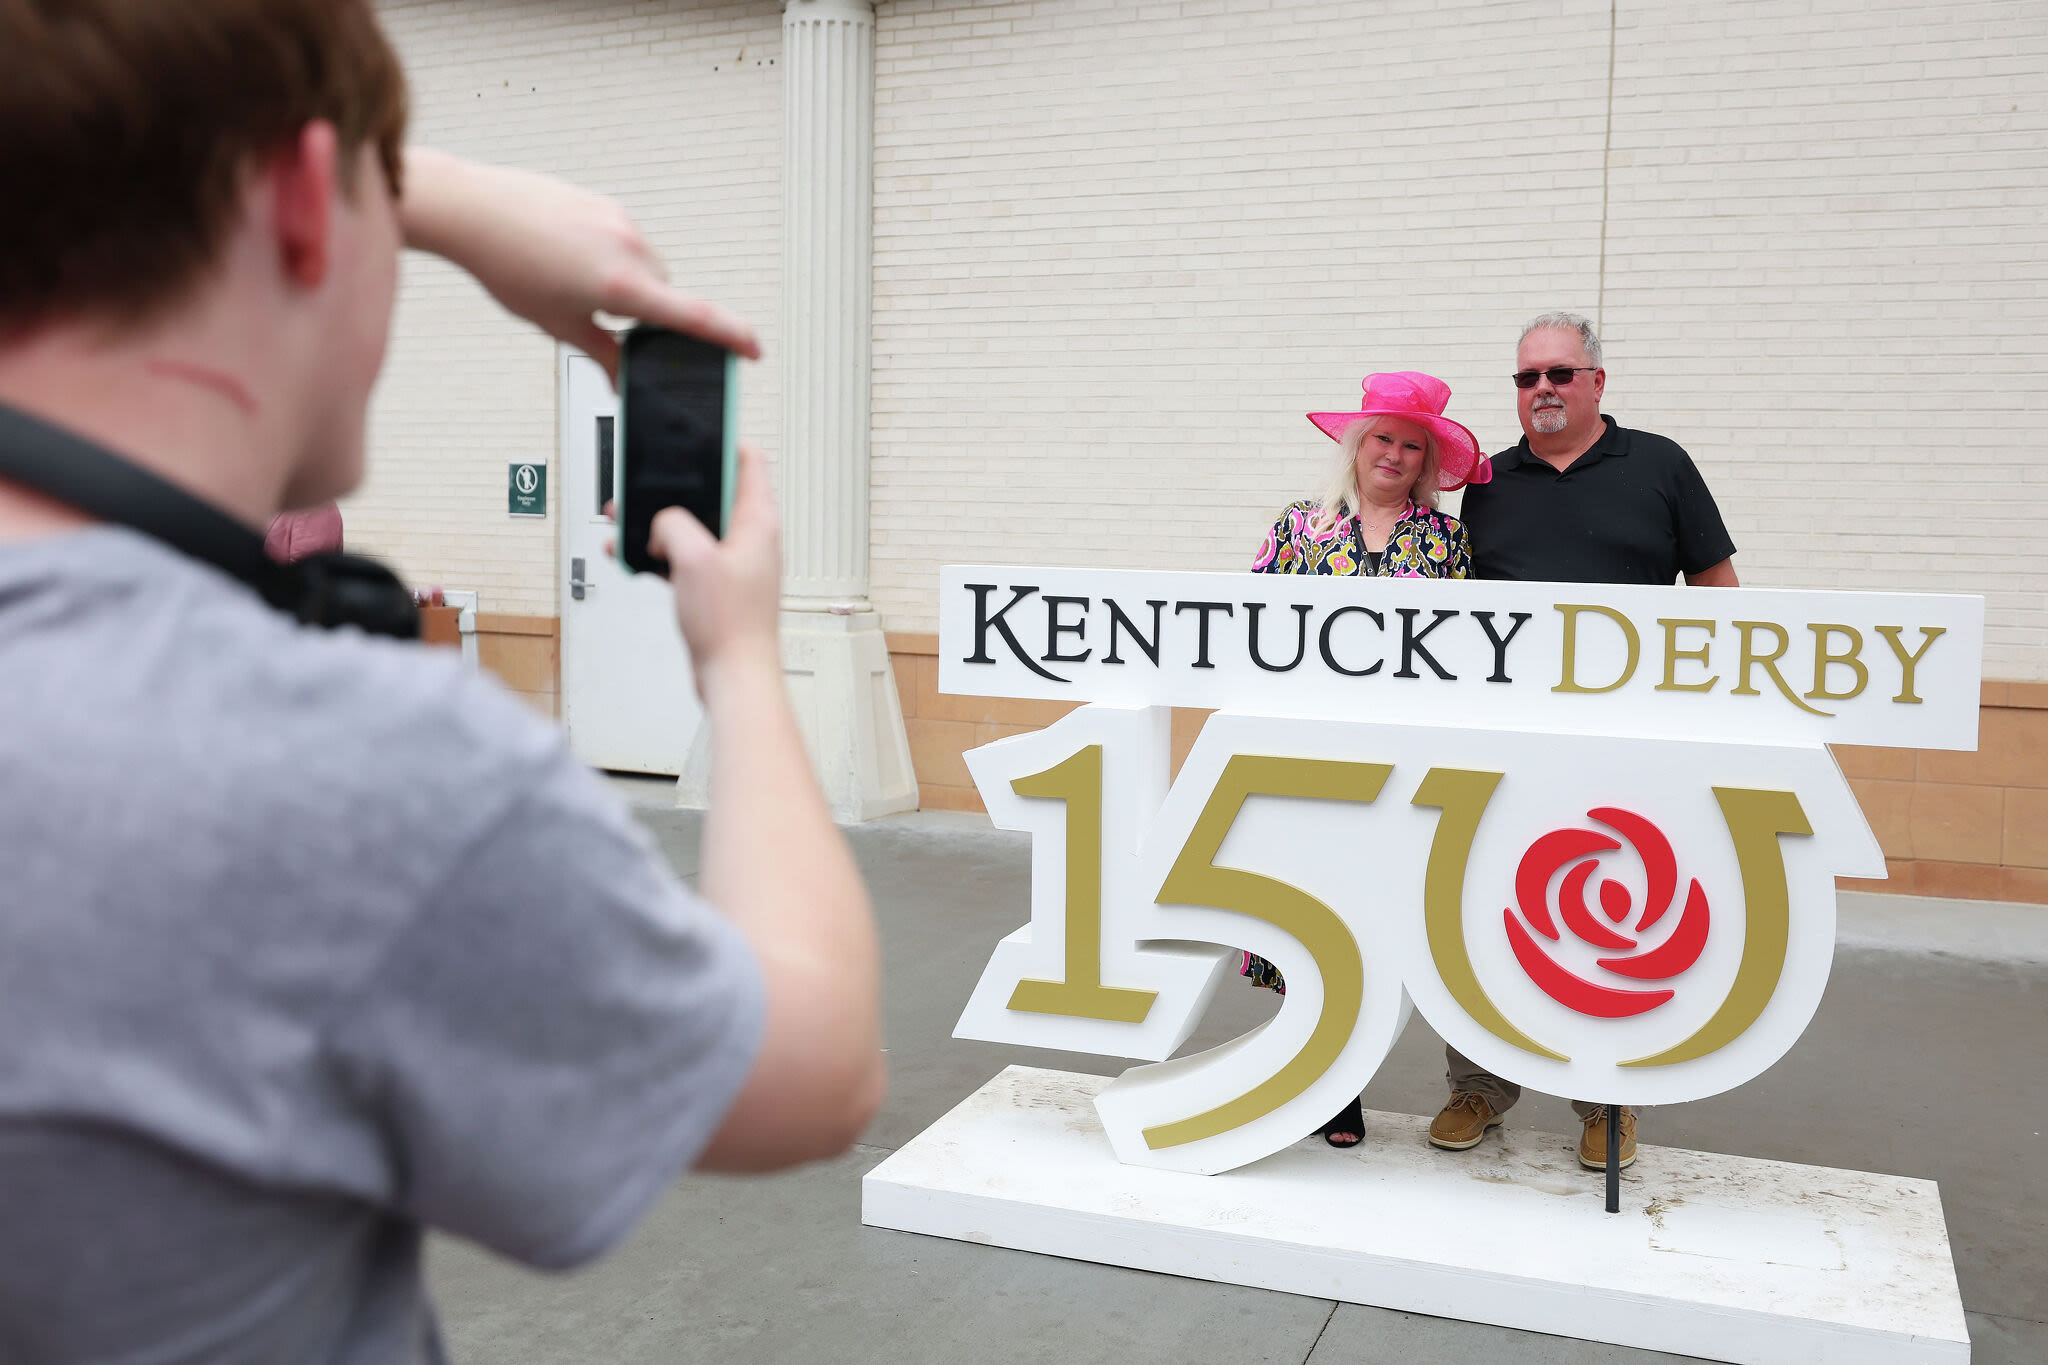 These Californians have horses racing in the 150th Kentucky Derby